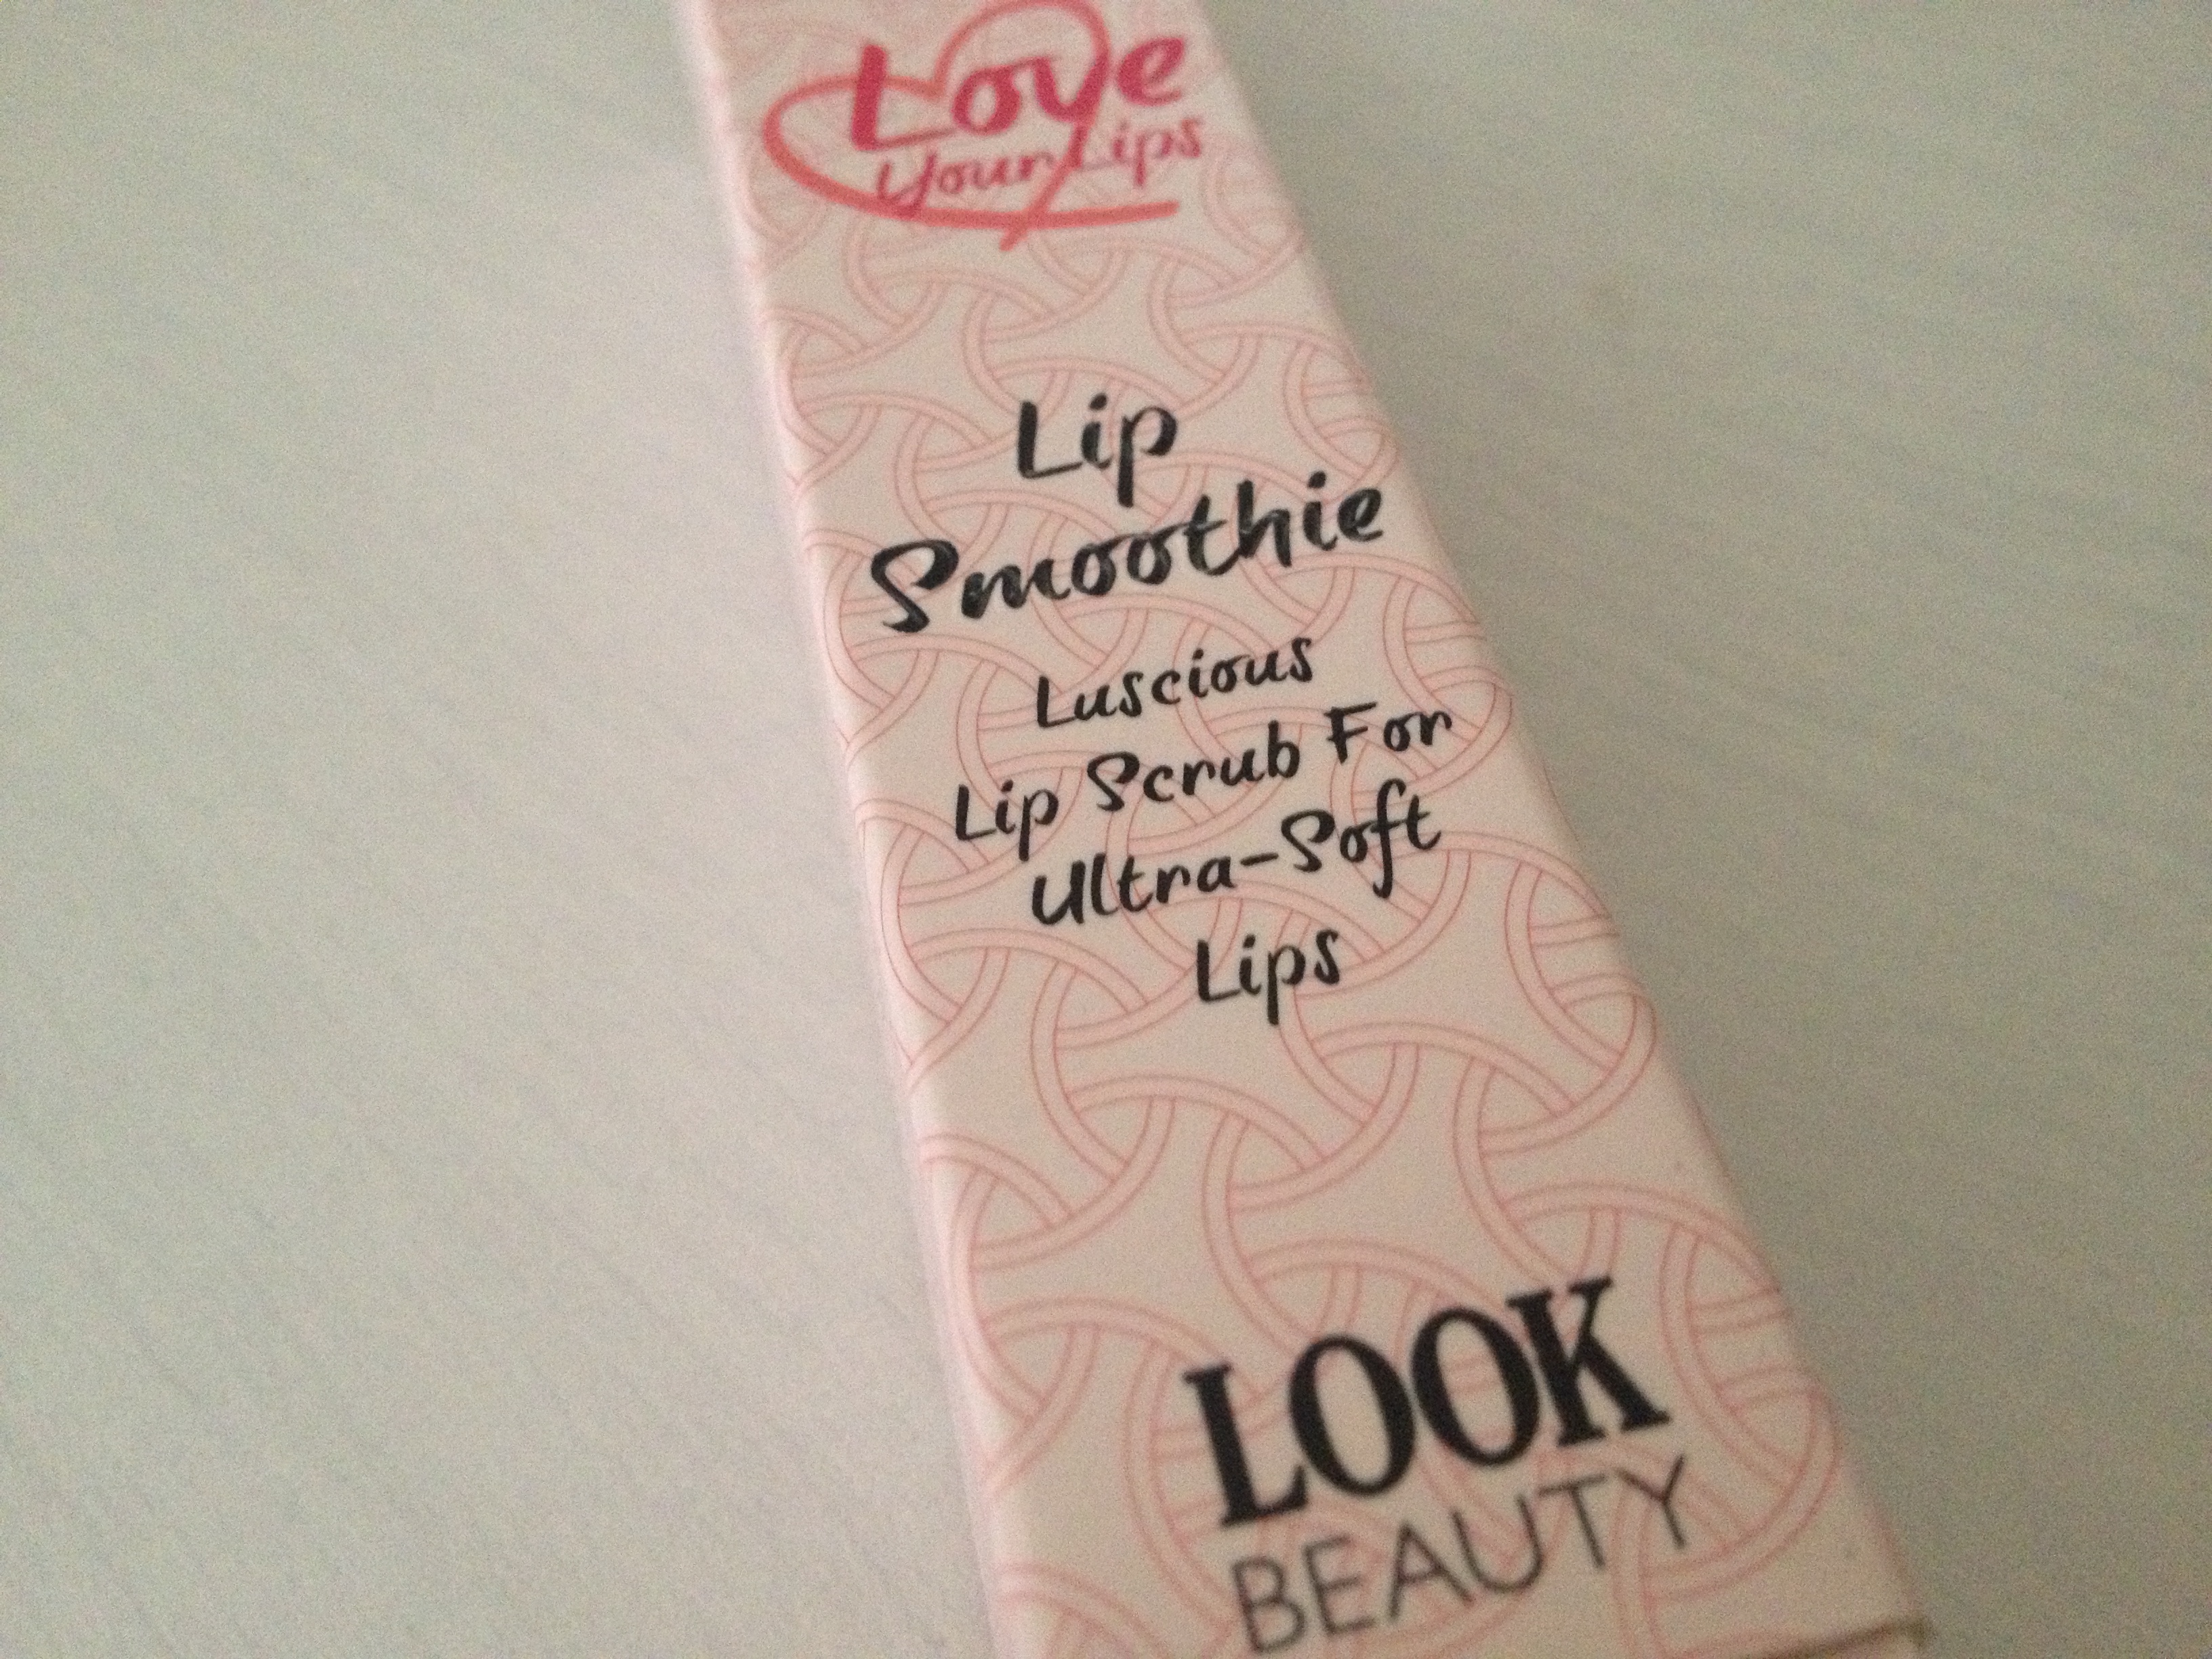 Look_Beauty_Lip_Smoothie (6)